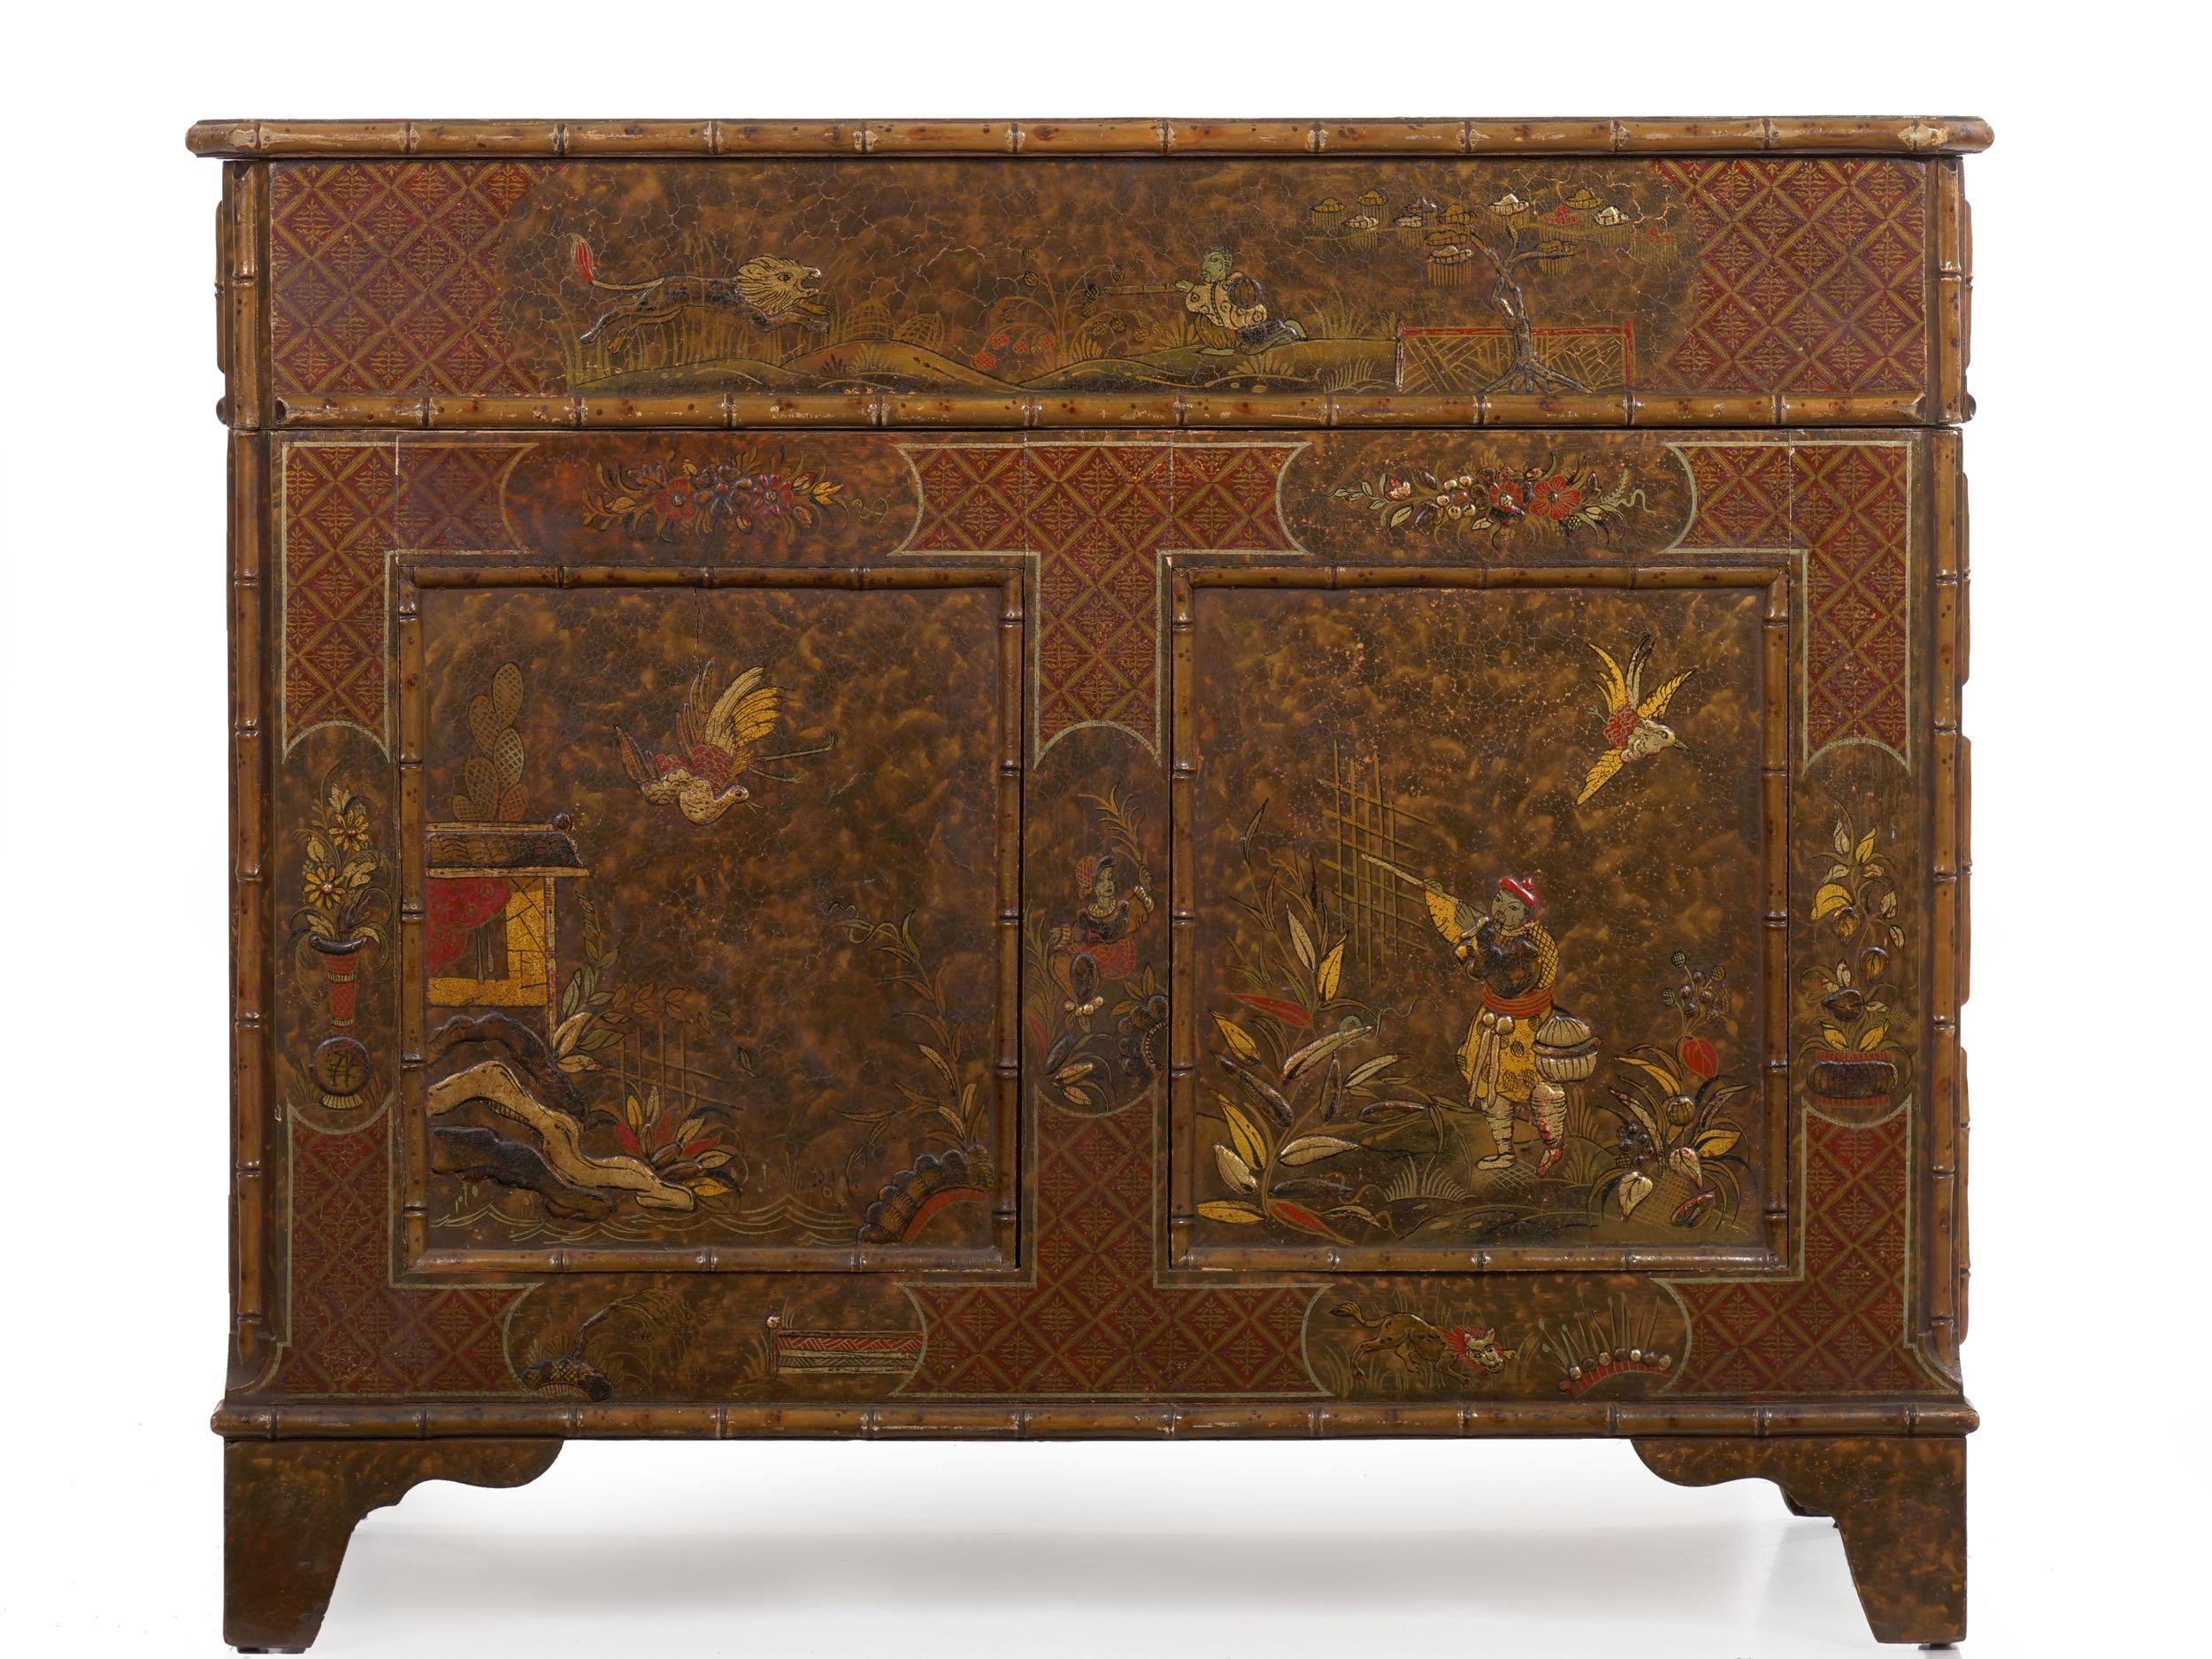 19th Century George III Style Chinoiserie Decorated Pedestal Desk, England, circa 1880